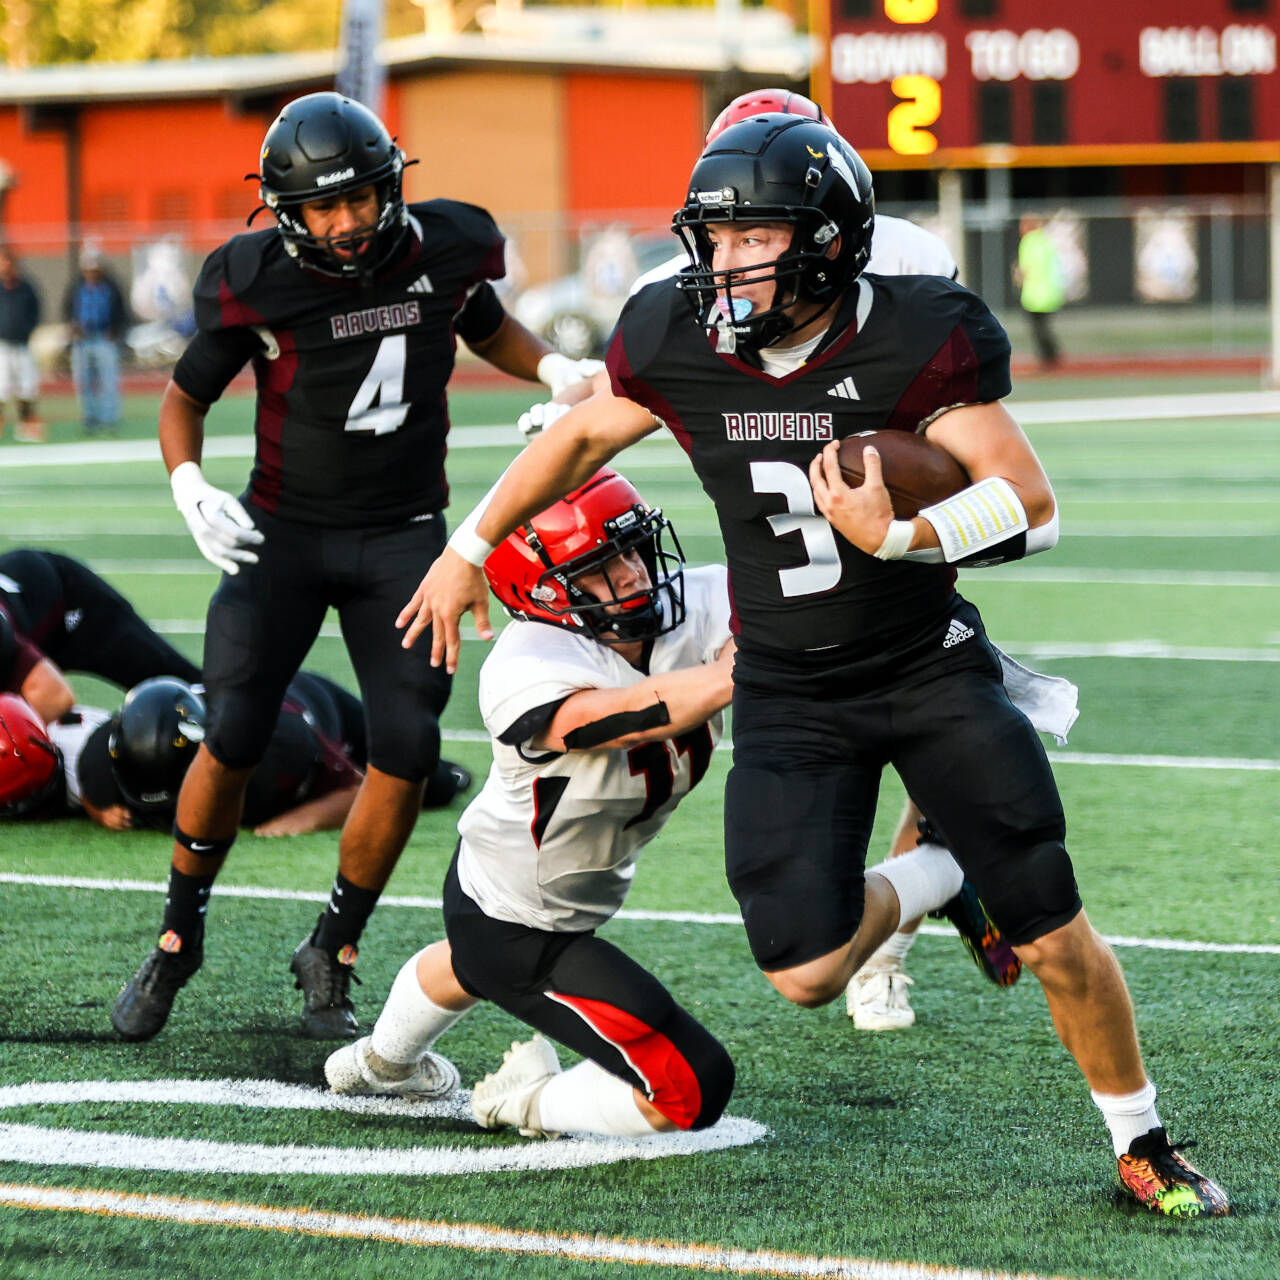 PHOTO BY LARRY BALE 
Raymond-South Bend quarterback Austin Snodgrass (3), seen here against Wahkiakum on Sept. 8, will lead the Ravens against undefeated Ilwaco in a Week 3 matchup.